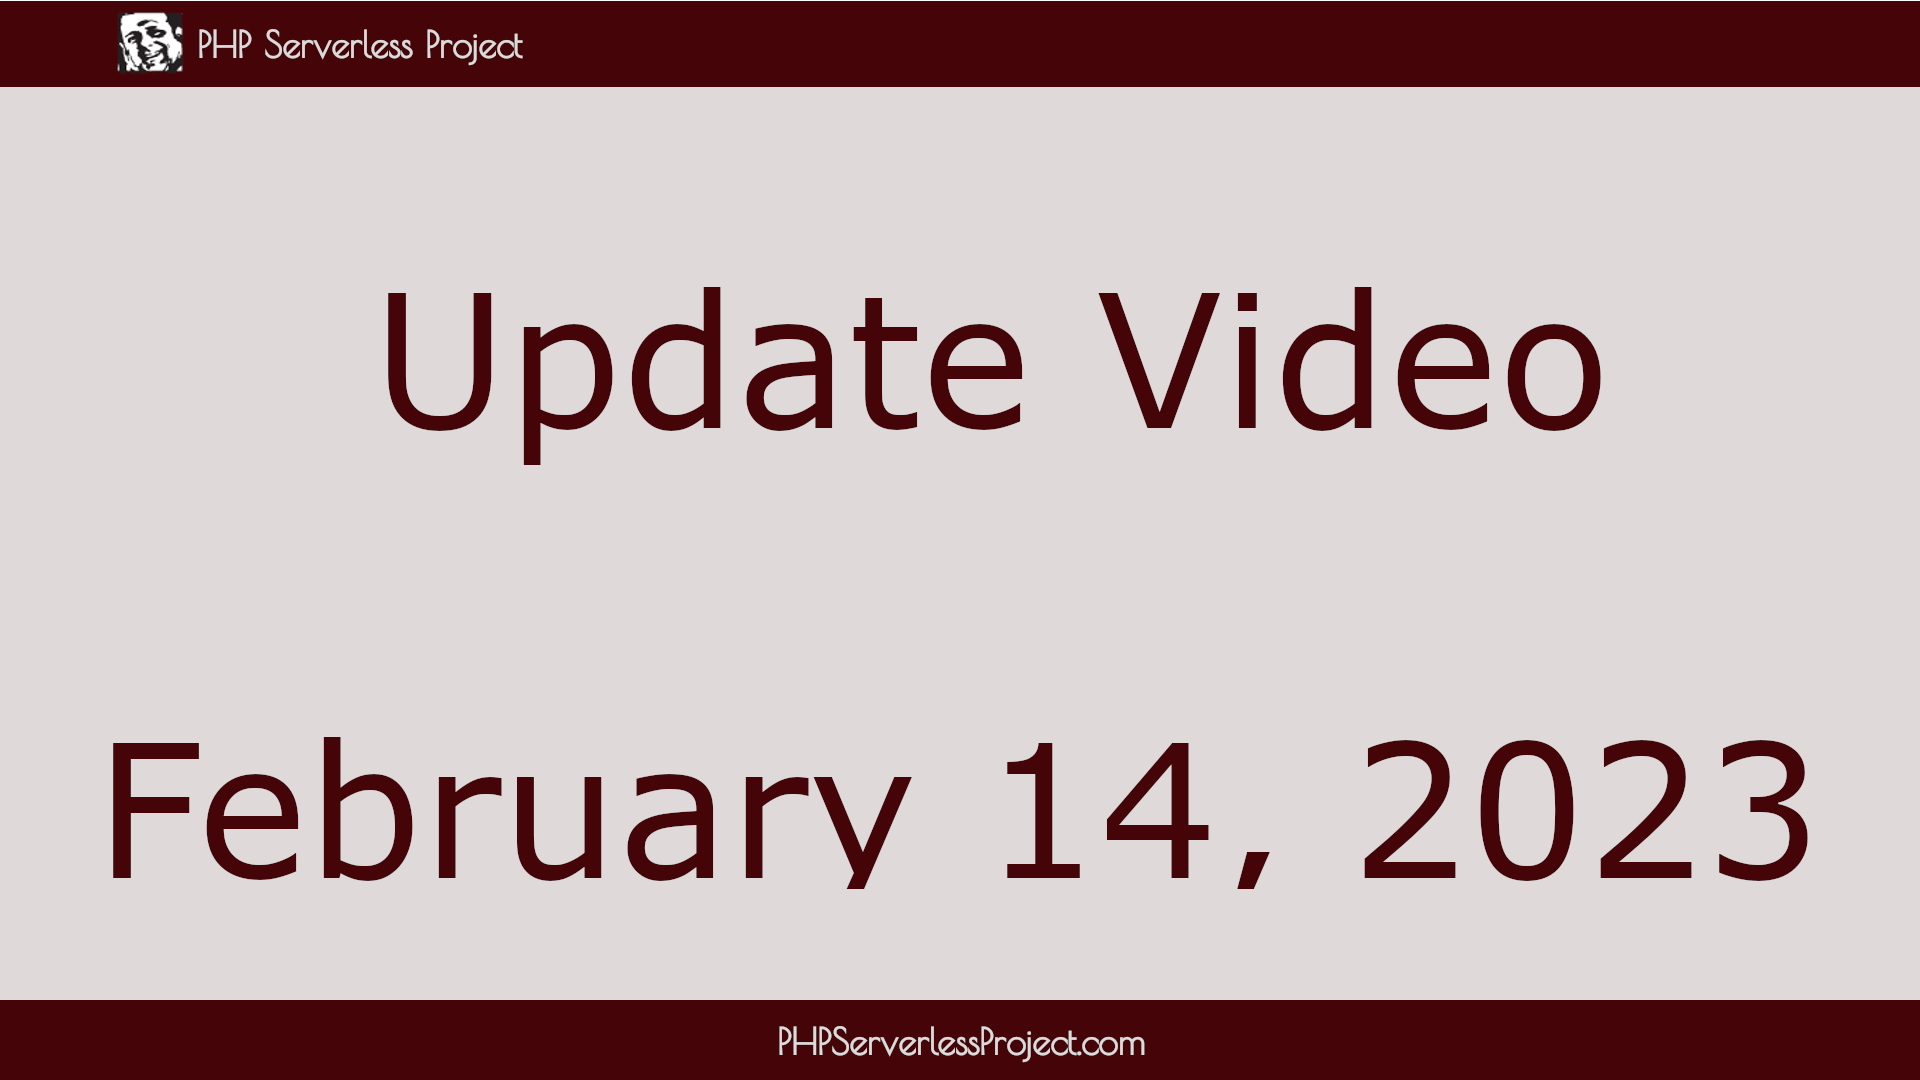 Project Update, February 14, 2023